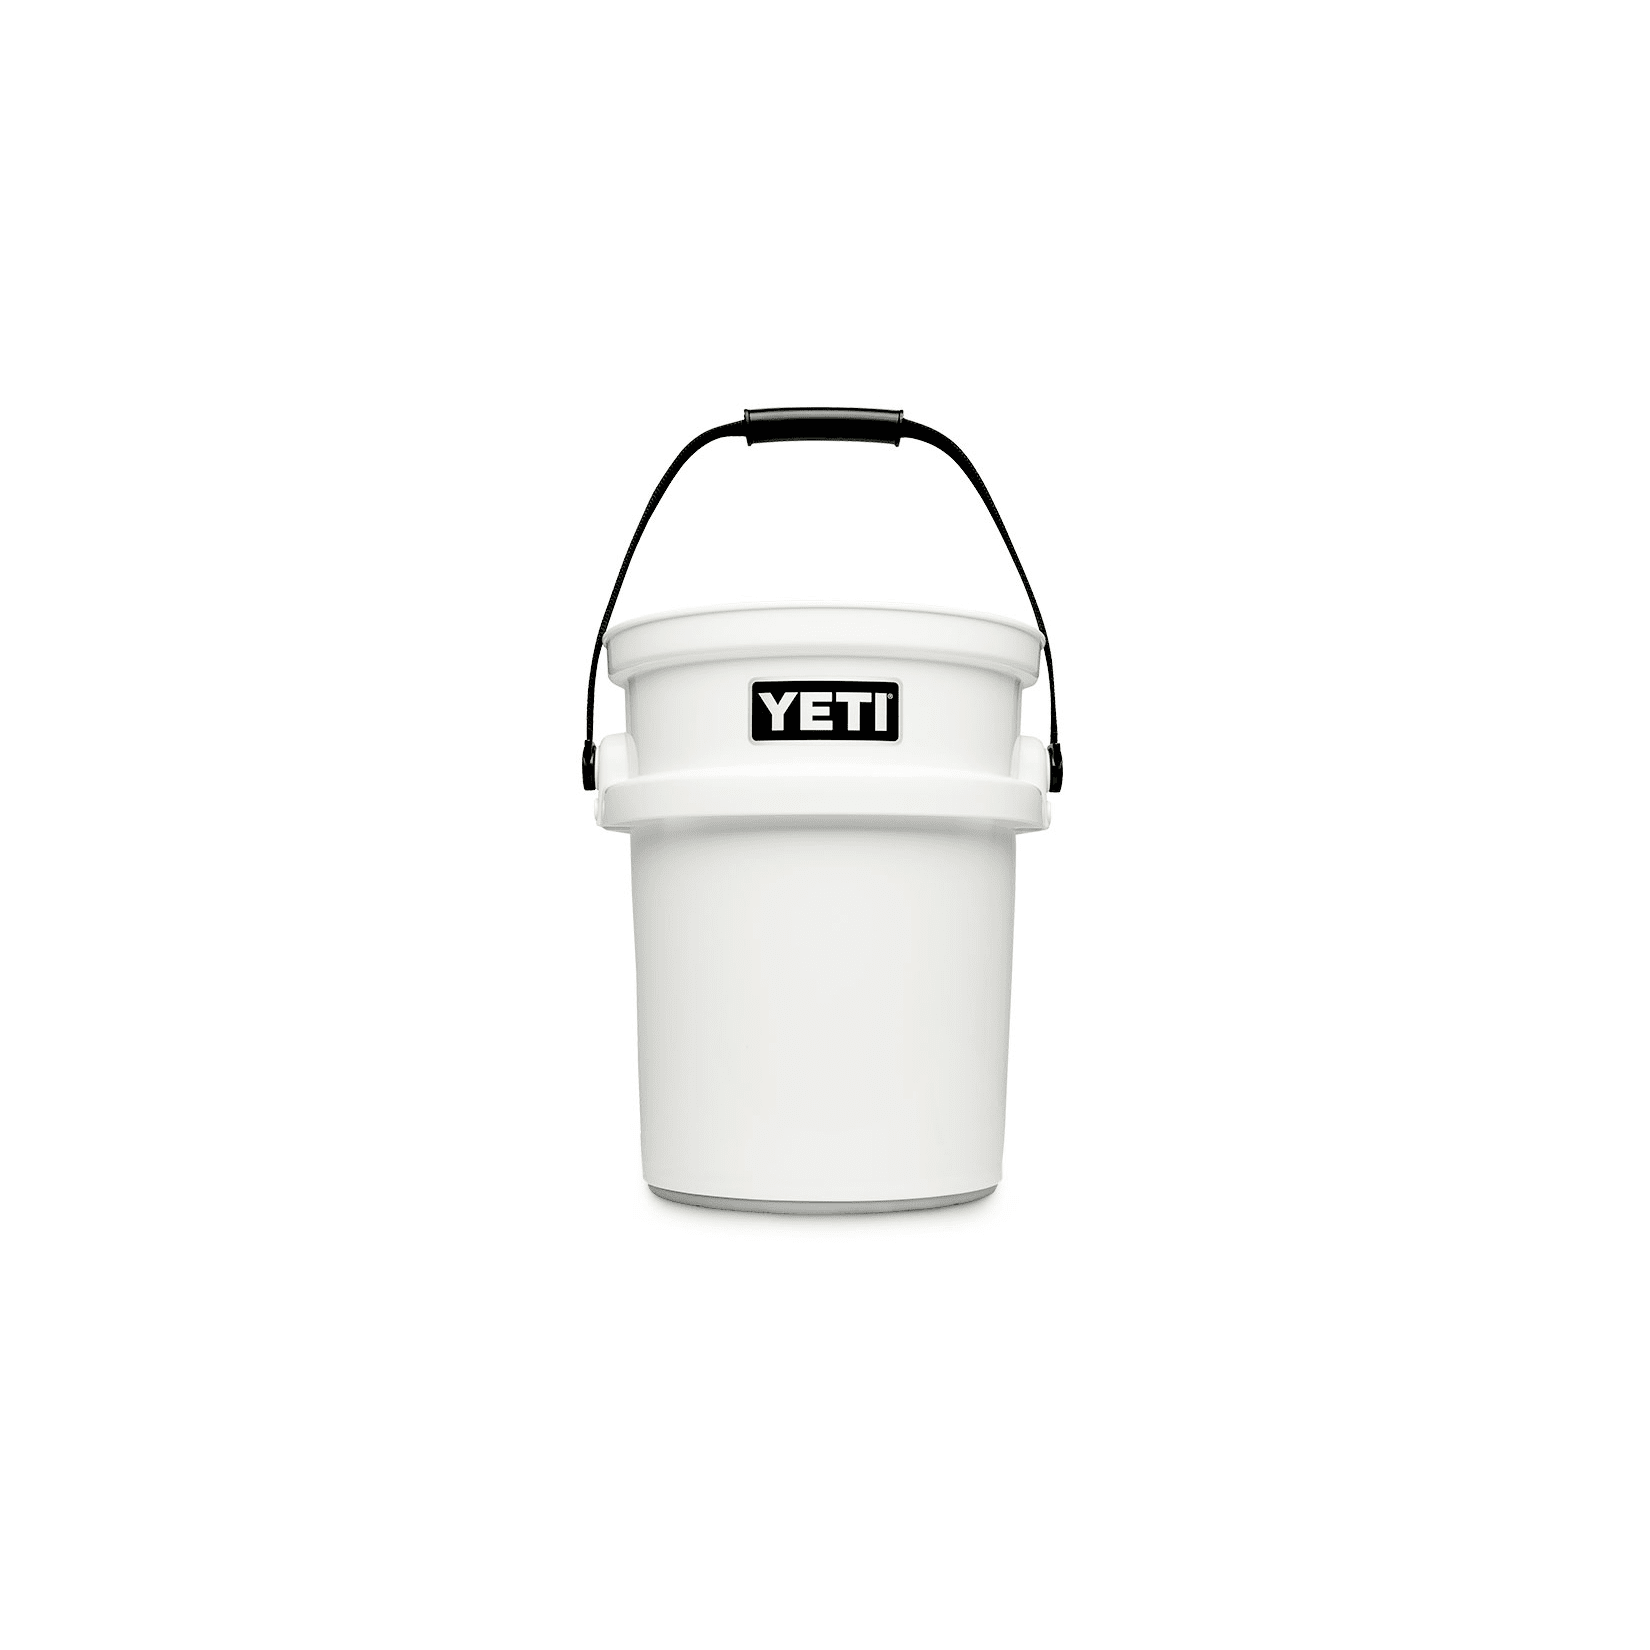 https://image.fisheriessupply.com/c_lpad,dpr_3.0,w_550,h_550,d_imageComingSoon-tiff/f_auto,q_auto/v1/static-images/yeti-coolers-loadout-5-gallon-work-bucket-white-front